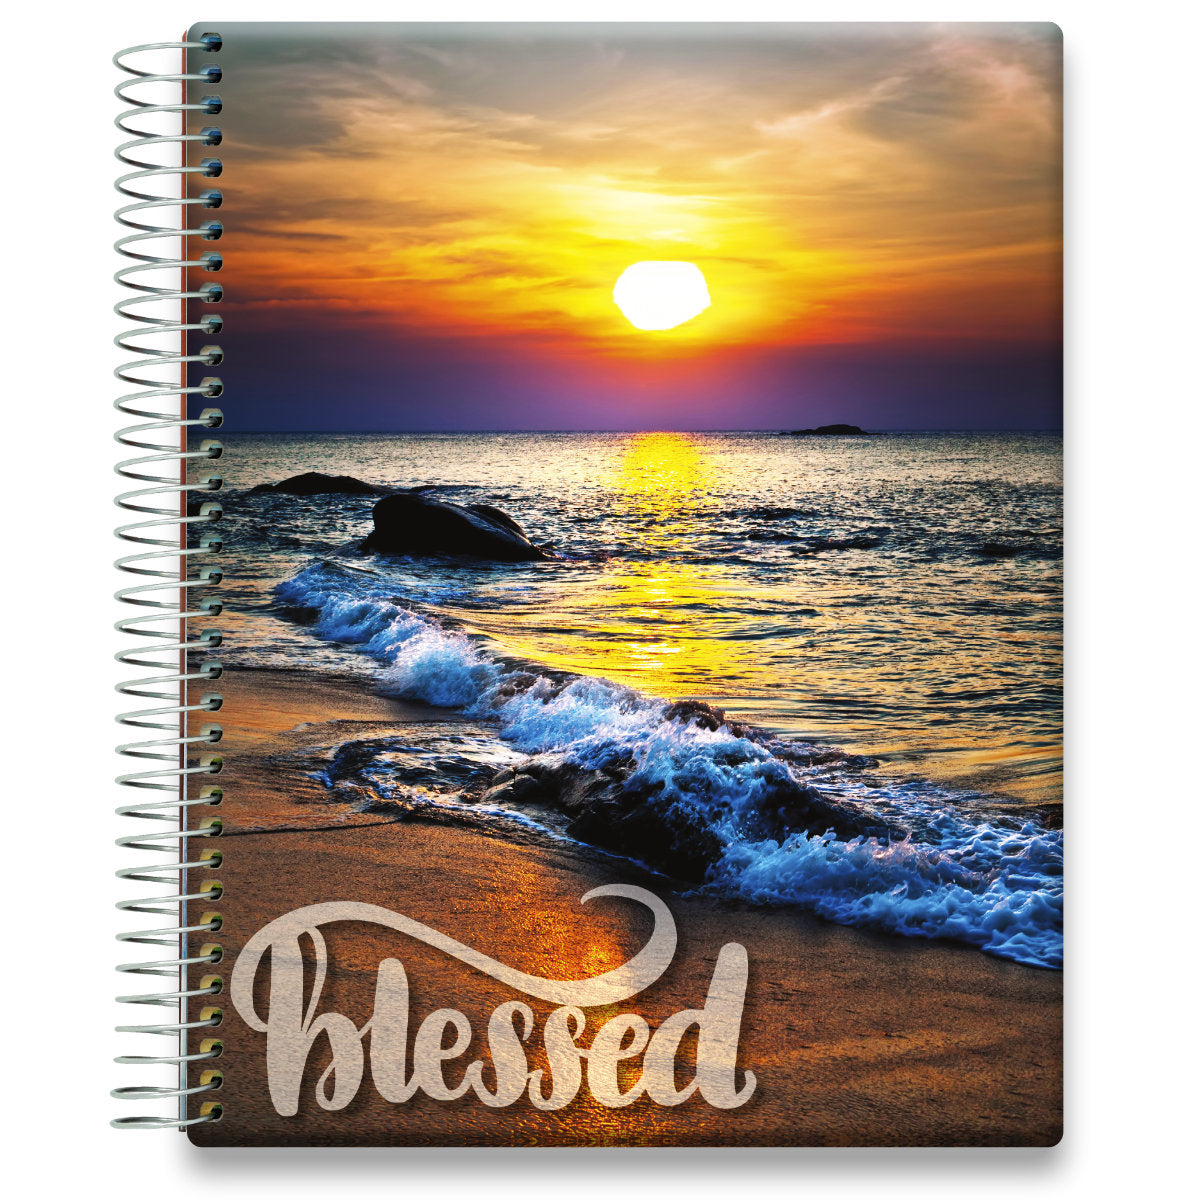 Coaching Session + Oct 2024 to Dec 2025 Planner - Ocean Sunset